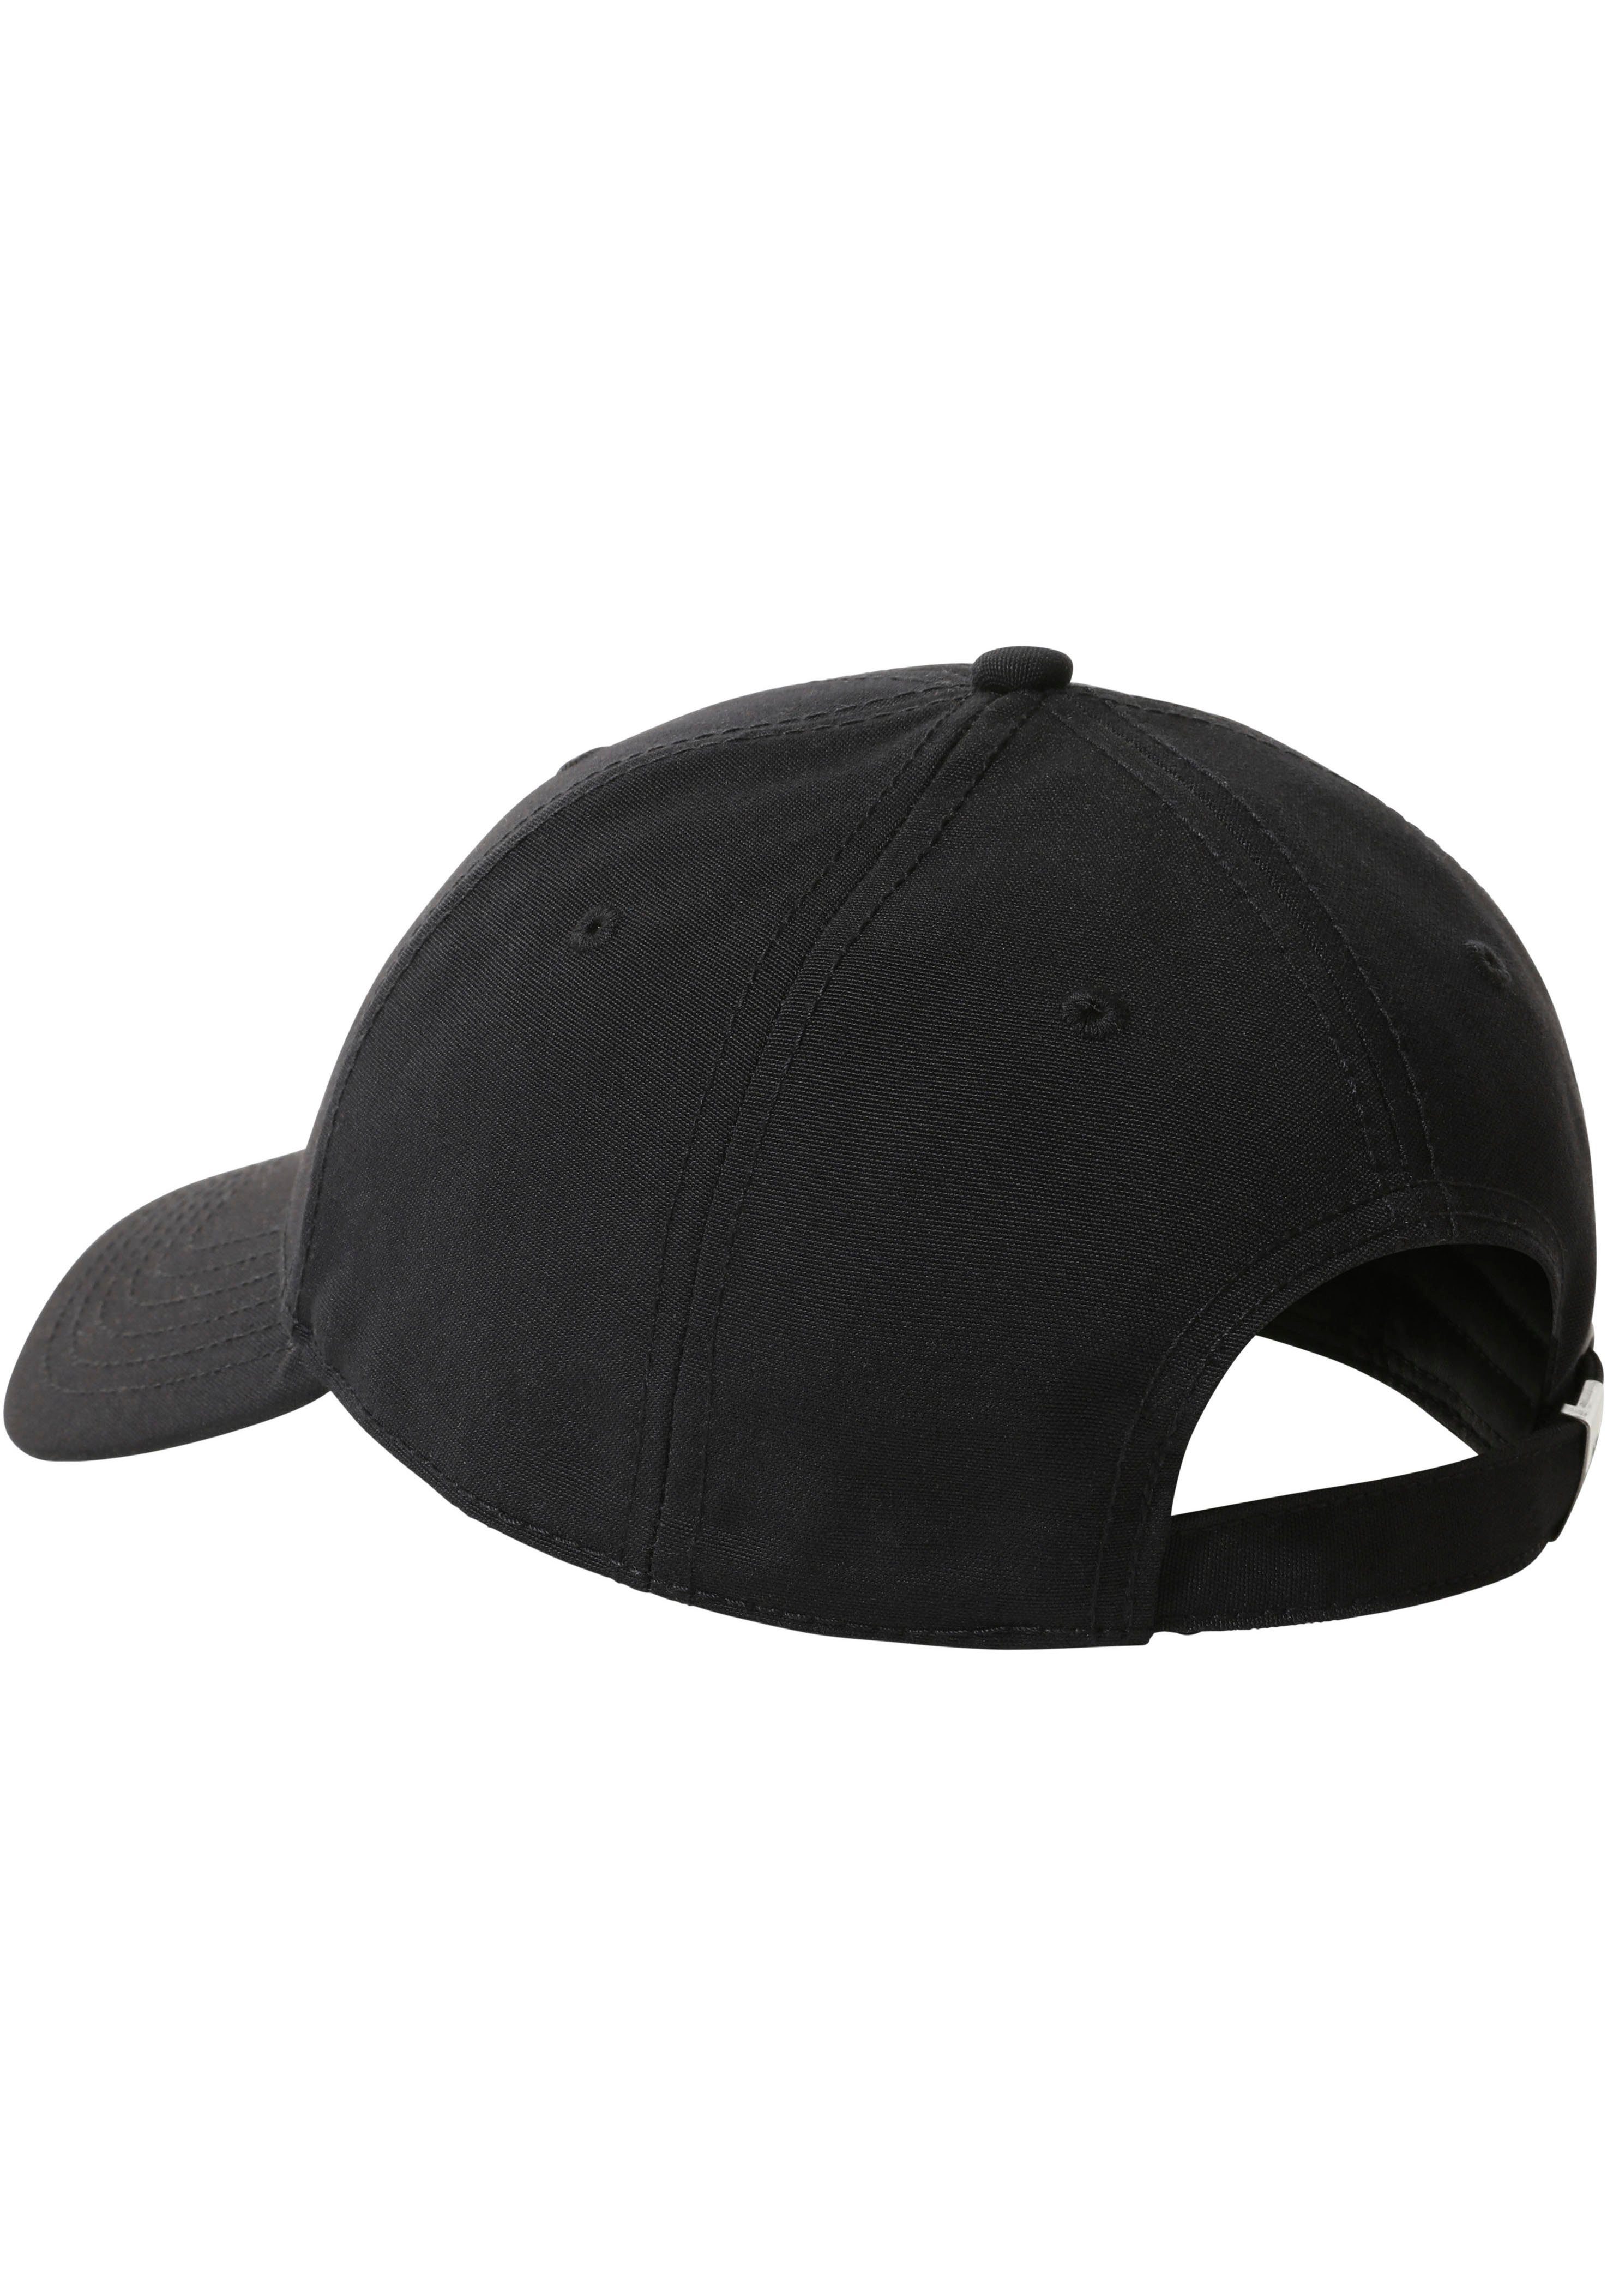 The North Face Baseball Cap 66 schwarz HAT CLASSIC RECYCLED